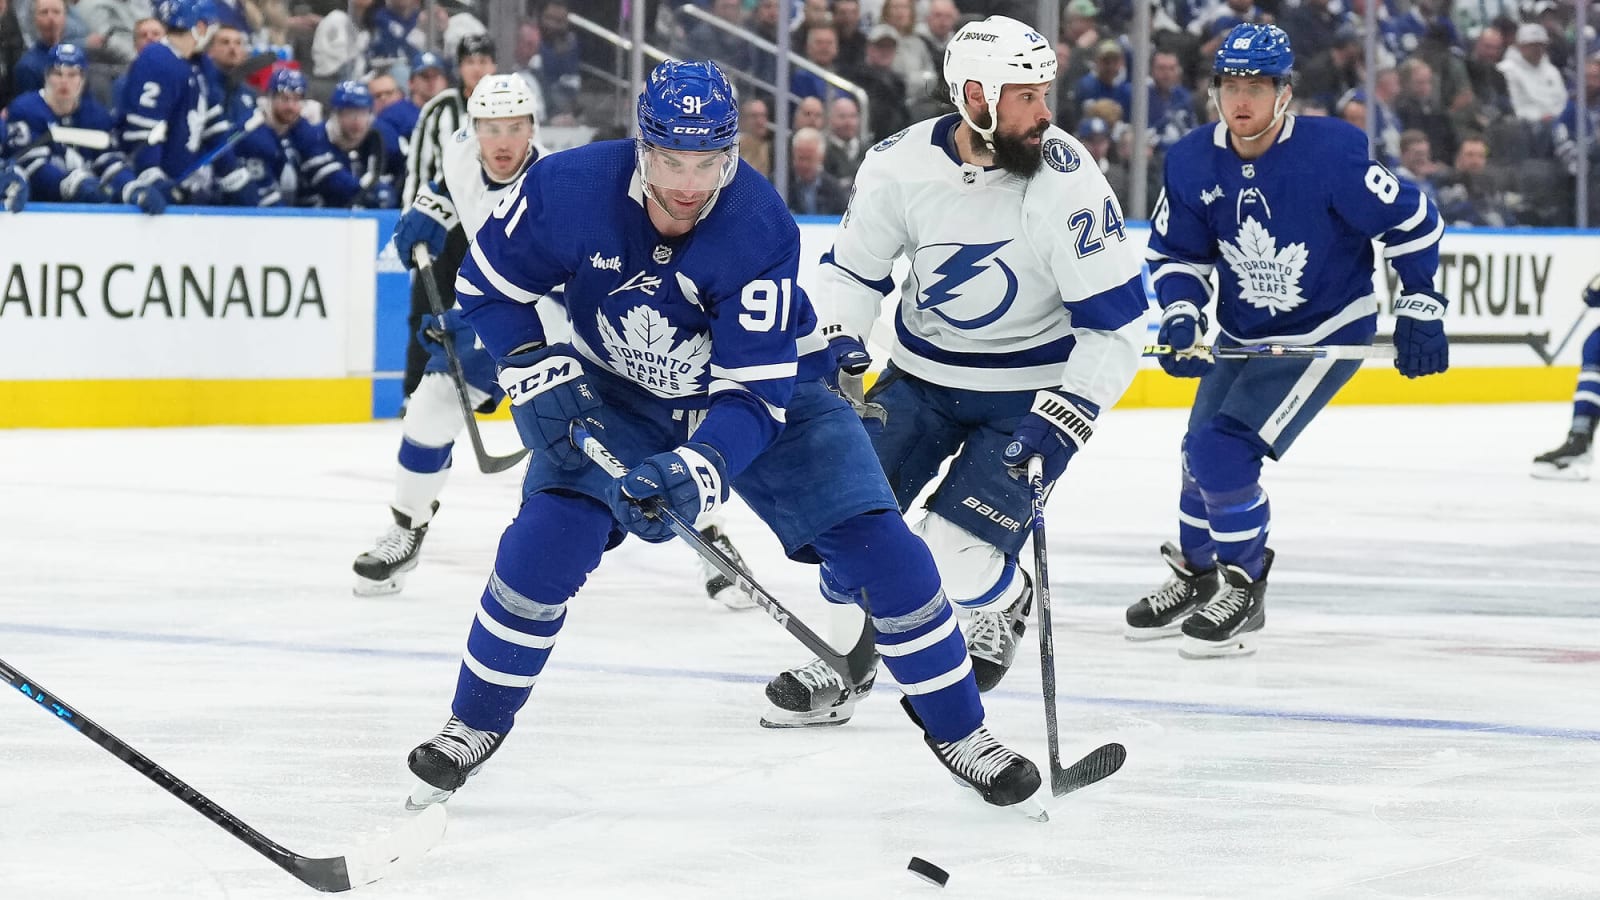 Key takeaways from Maple Leafs' 7-2 win over the Lightning